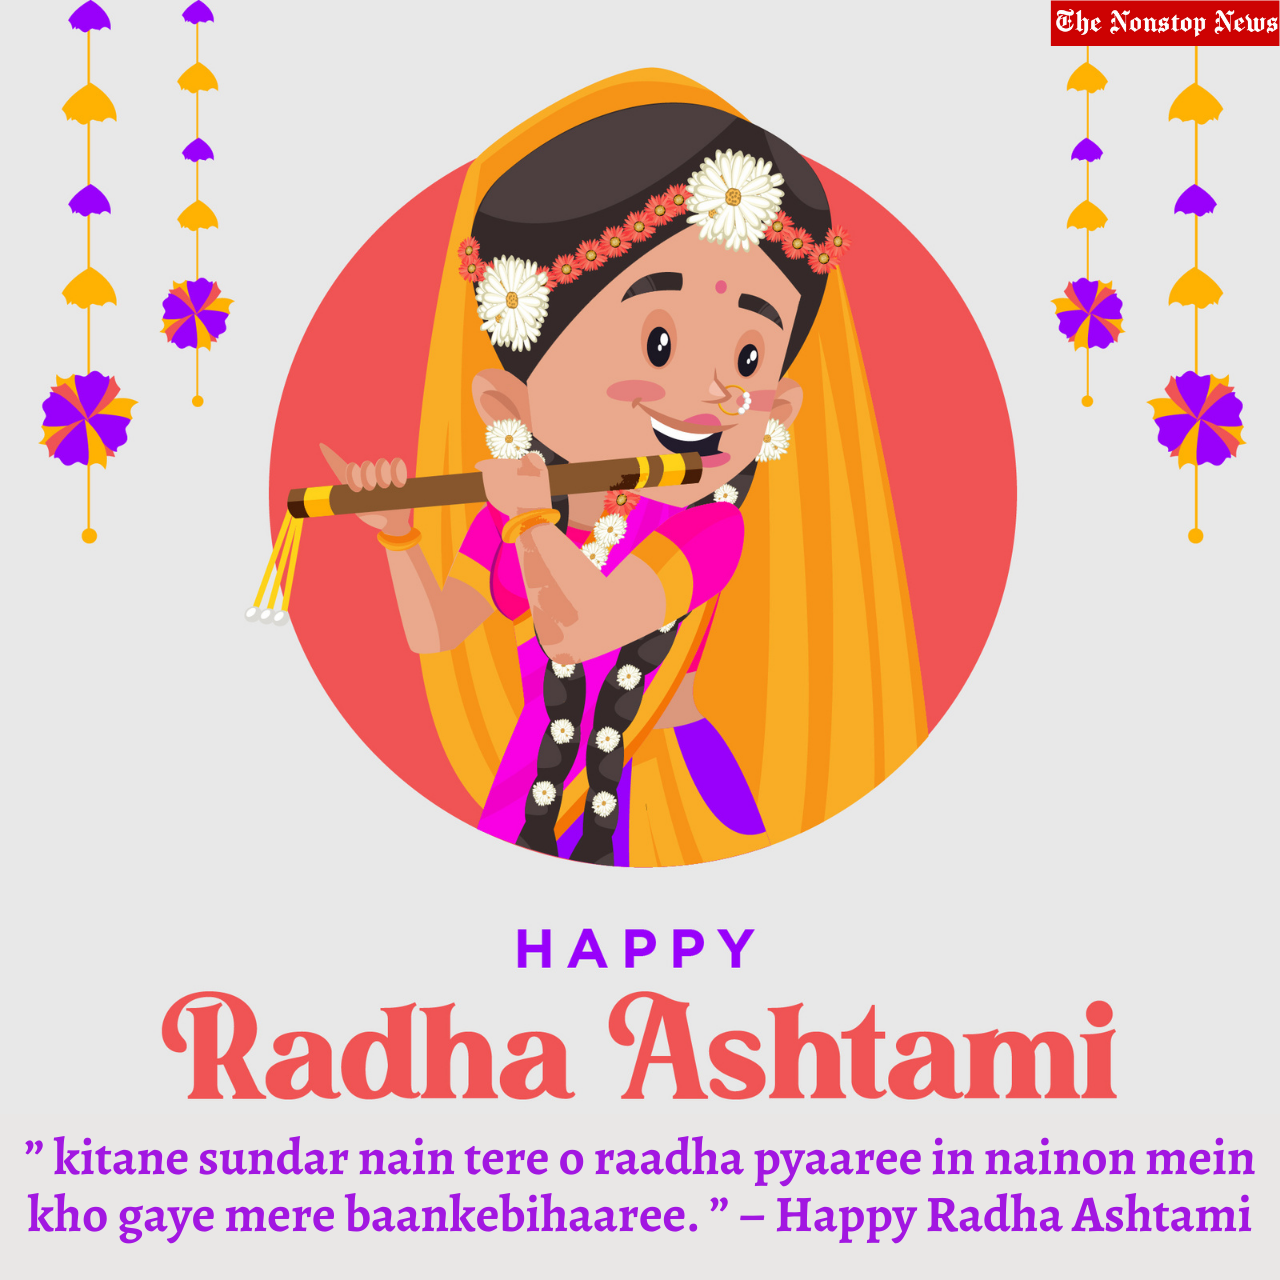 Happy Radha Ashtami 2021 Wishes, Quotes, HD Images, Status, and Greetings to greet anyone